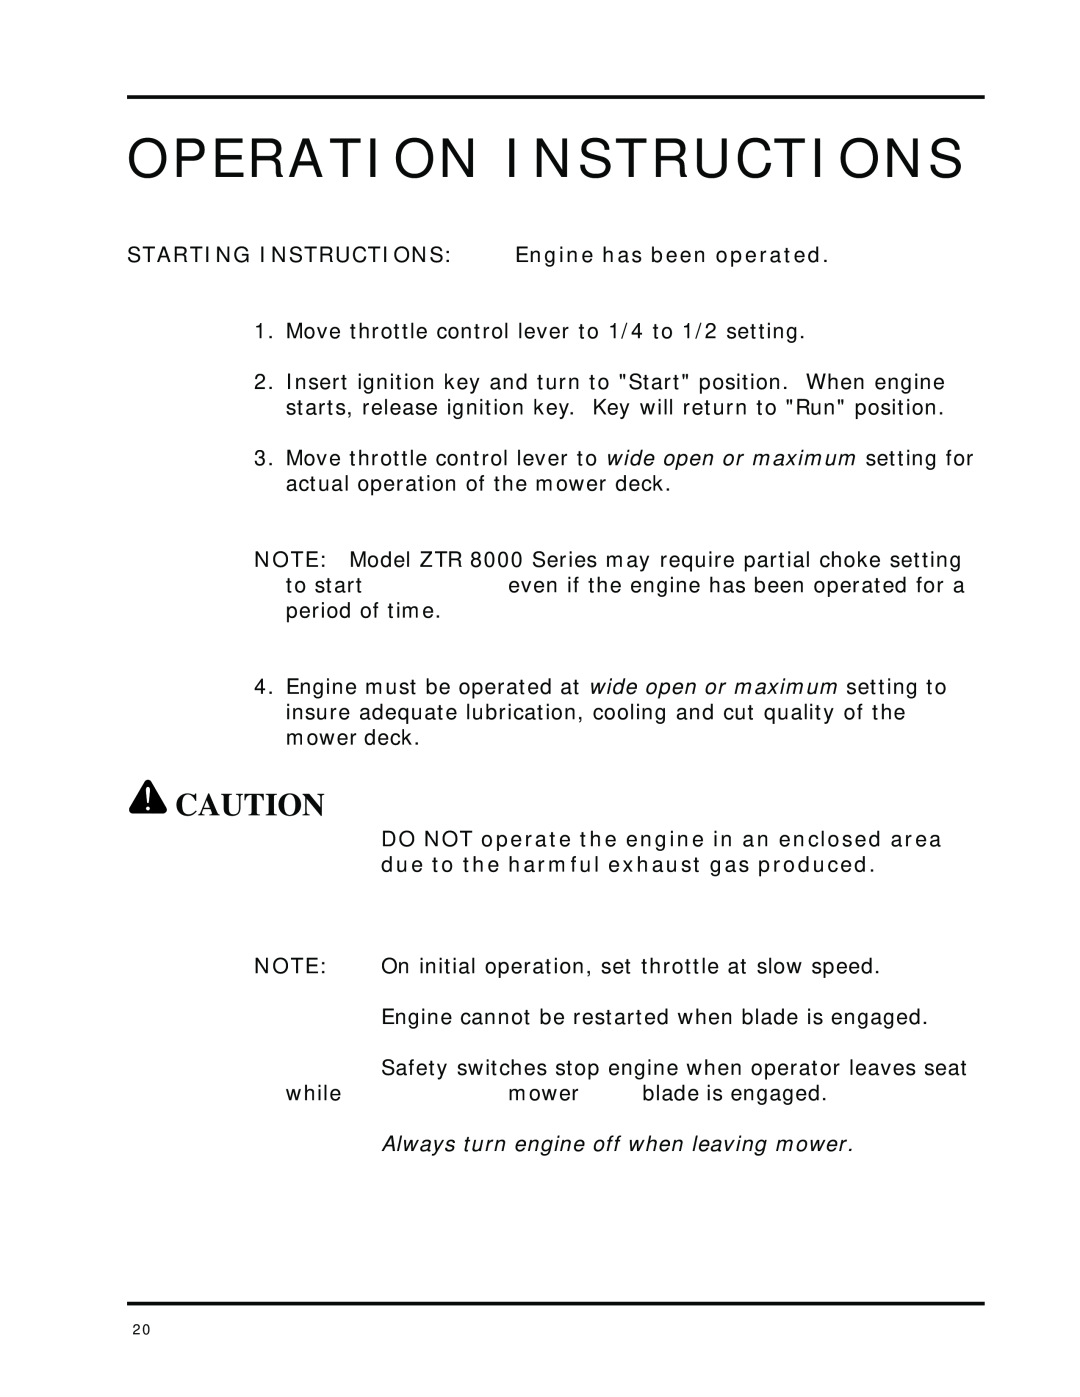 Dixon 8000 Series manual Operation Instructions, Starting Instructions, Engine has been operated 